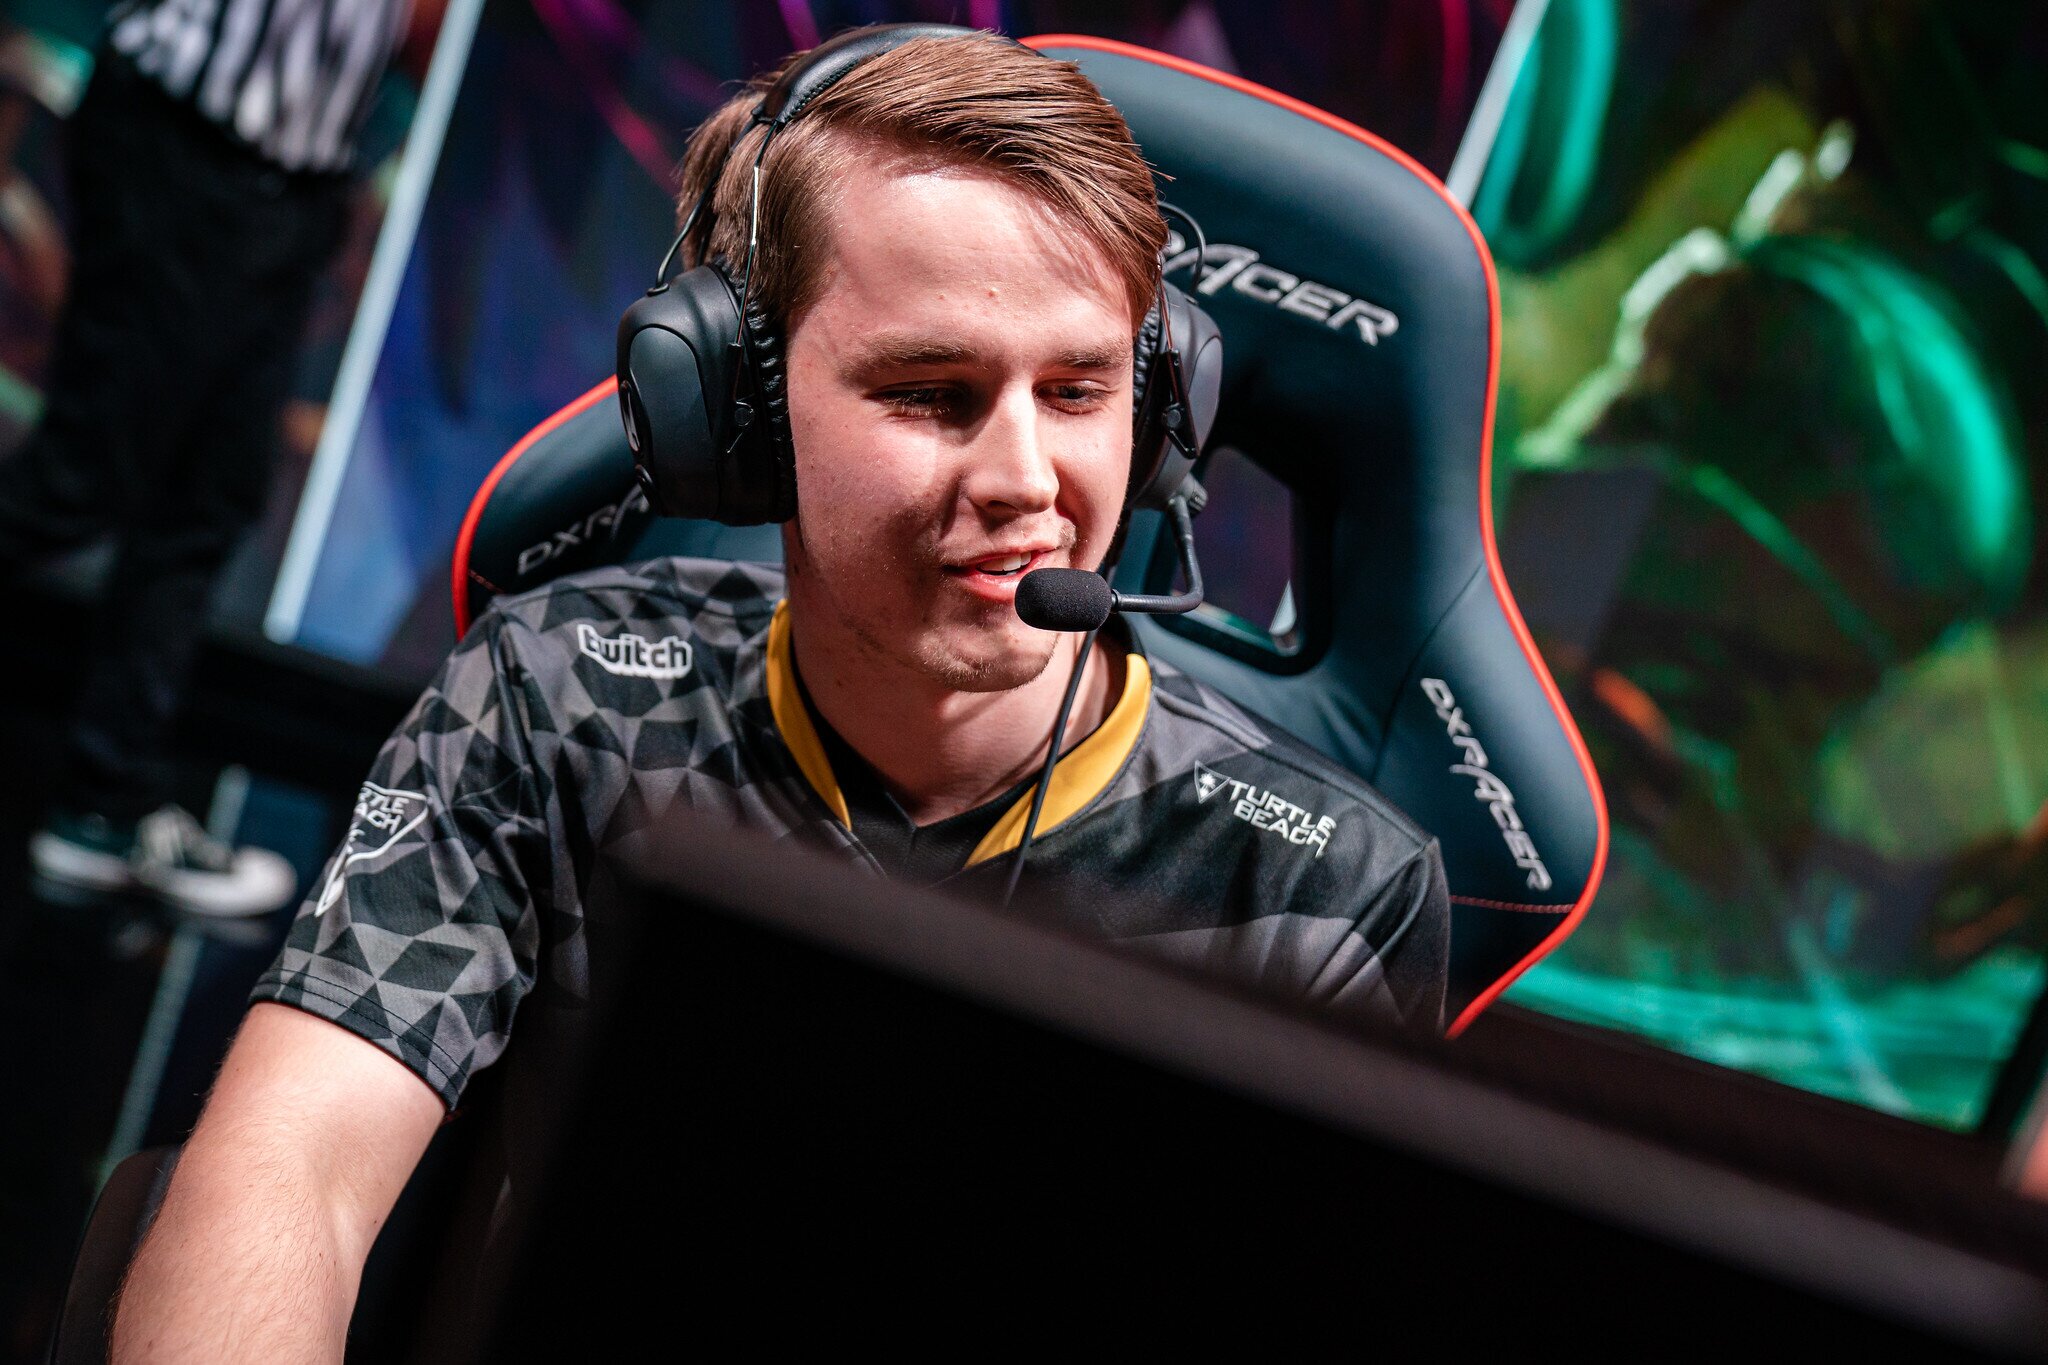 Splyce proved they deserve to be included in the conversation for top three after defeating Fnatic (Photo courtesy of Riot Games)